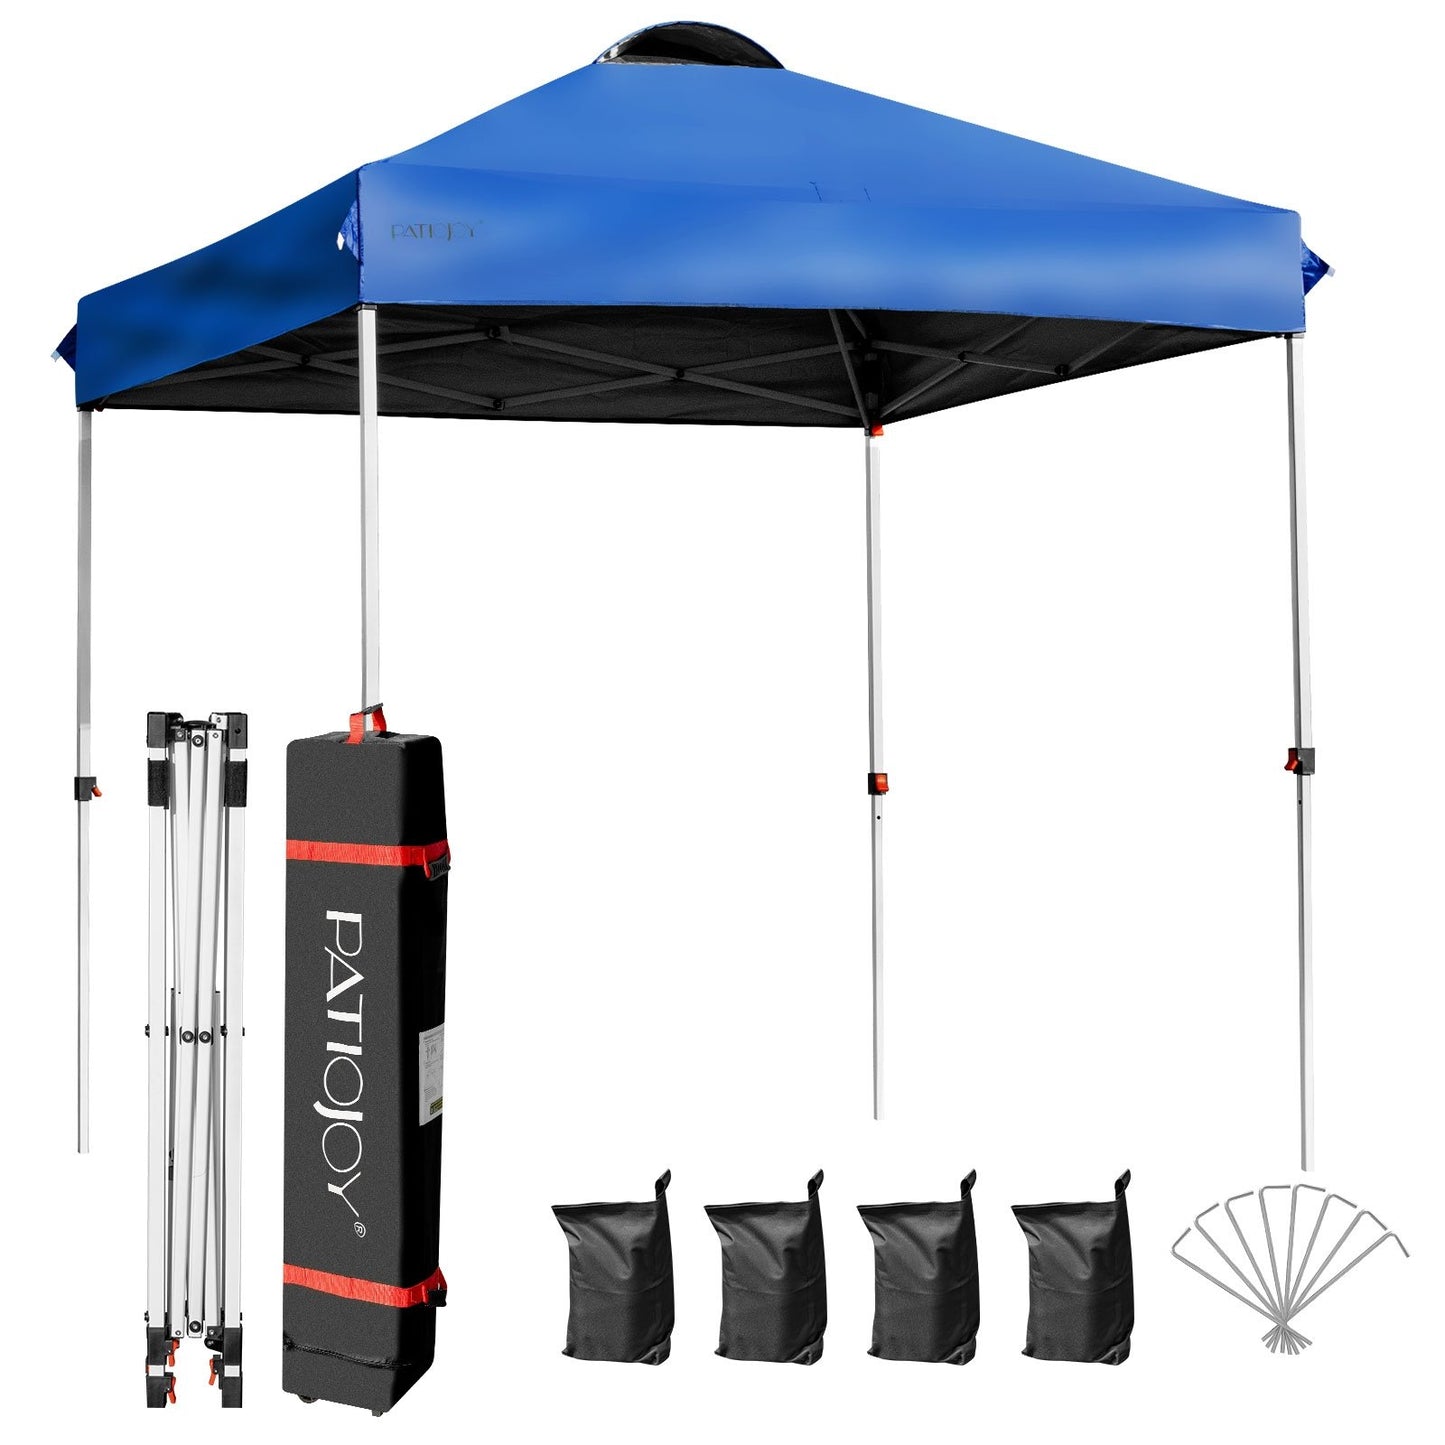 6.6 x 6.6 Feet Outdoor Pop-up Canopy Tent with Roller Bag, Blue